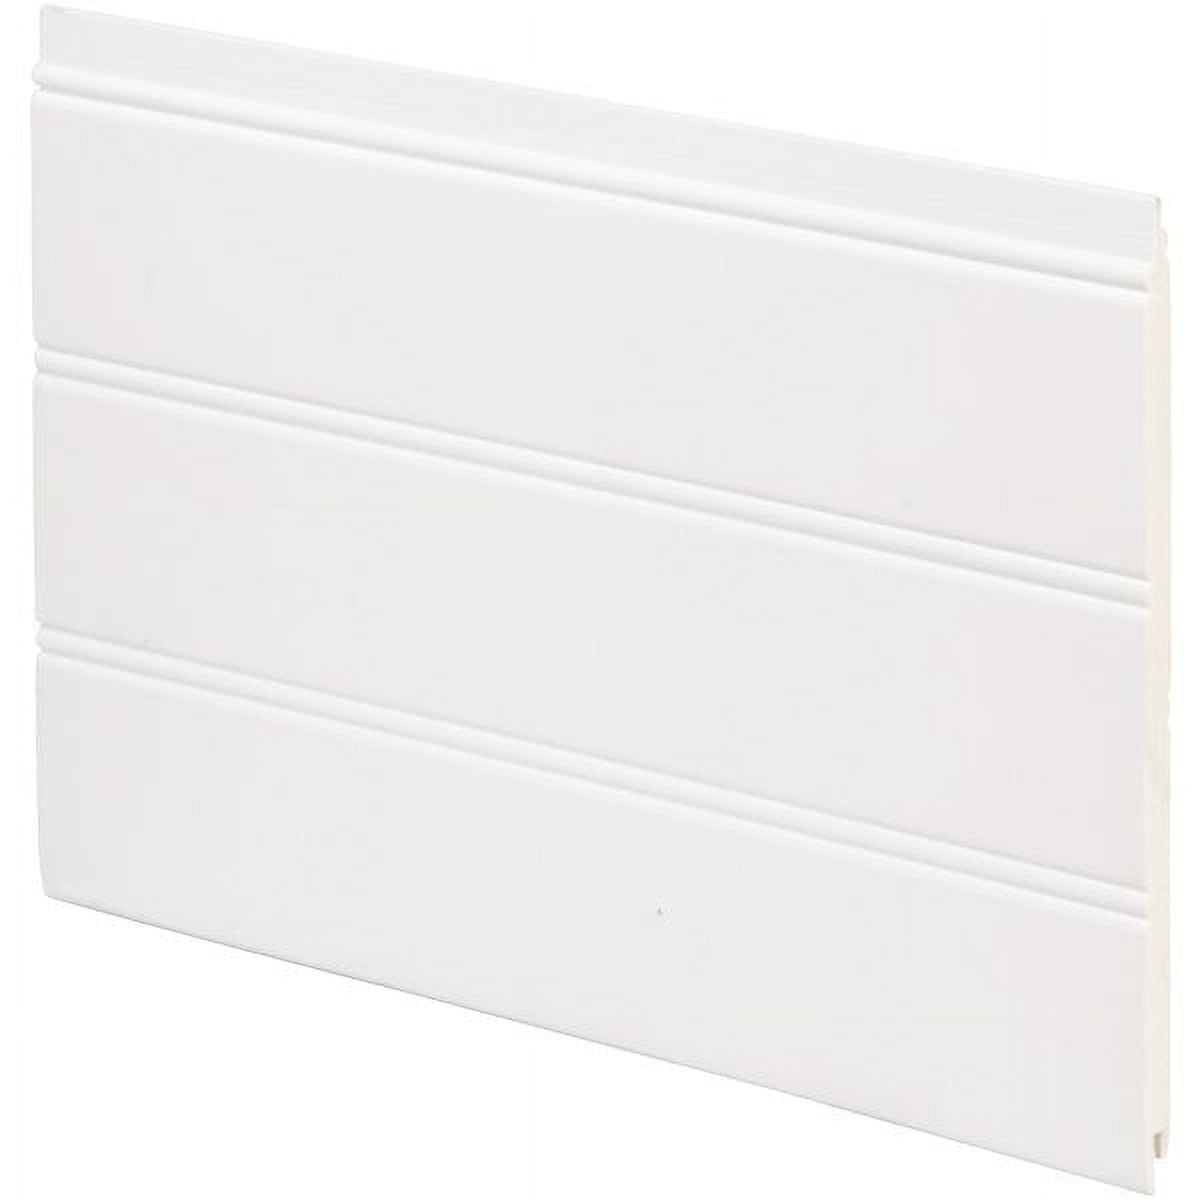 Deluxe Beadboard 8' Length PVC Wainscoting Kit Heights Up to 56 Inches